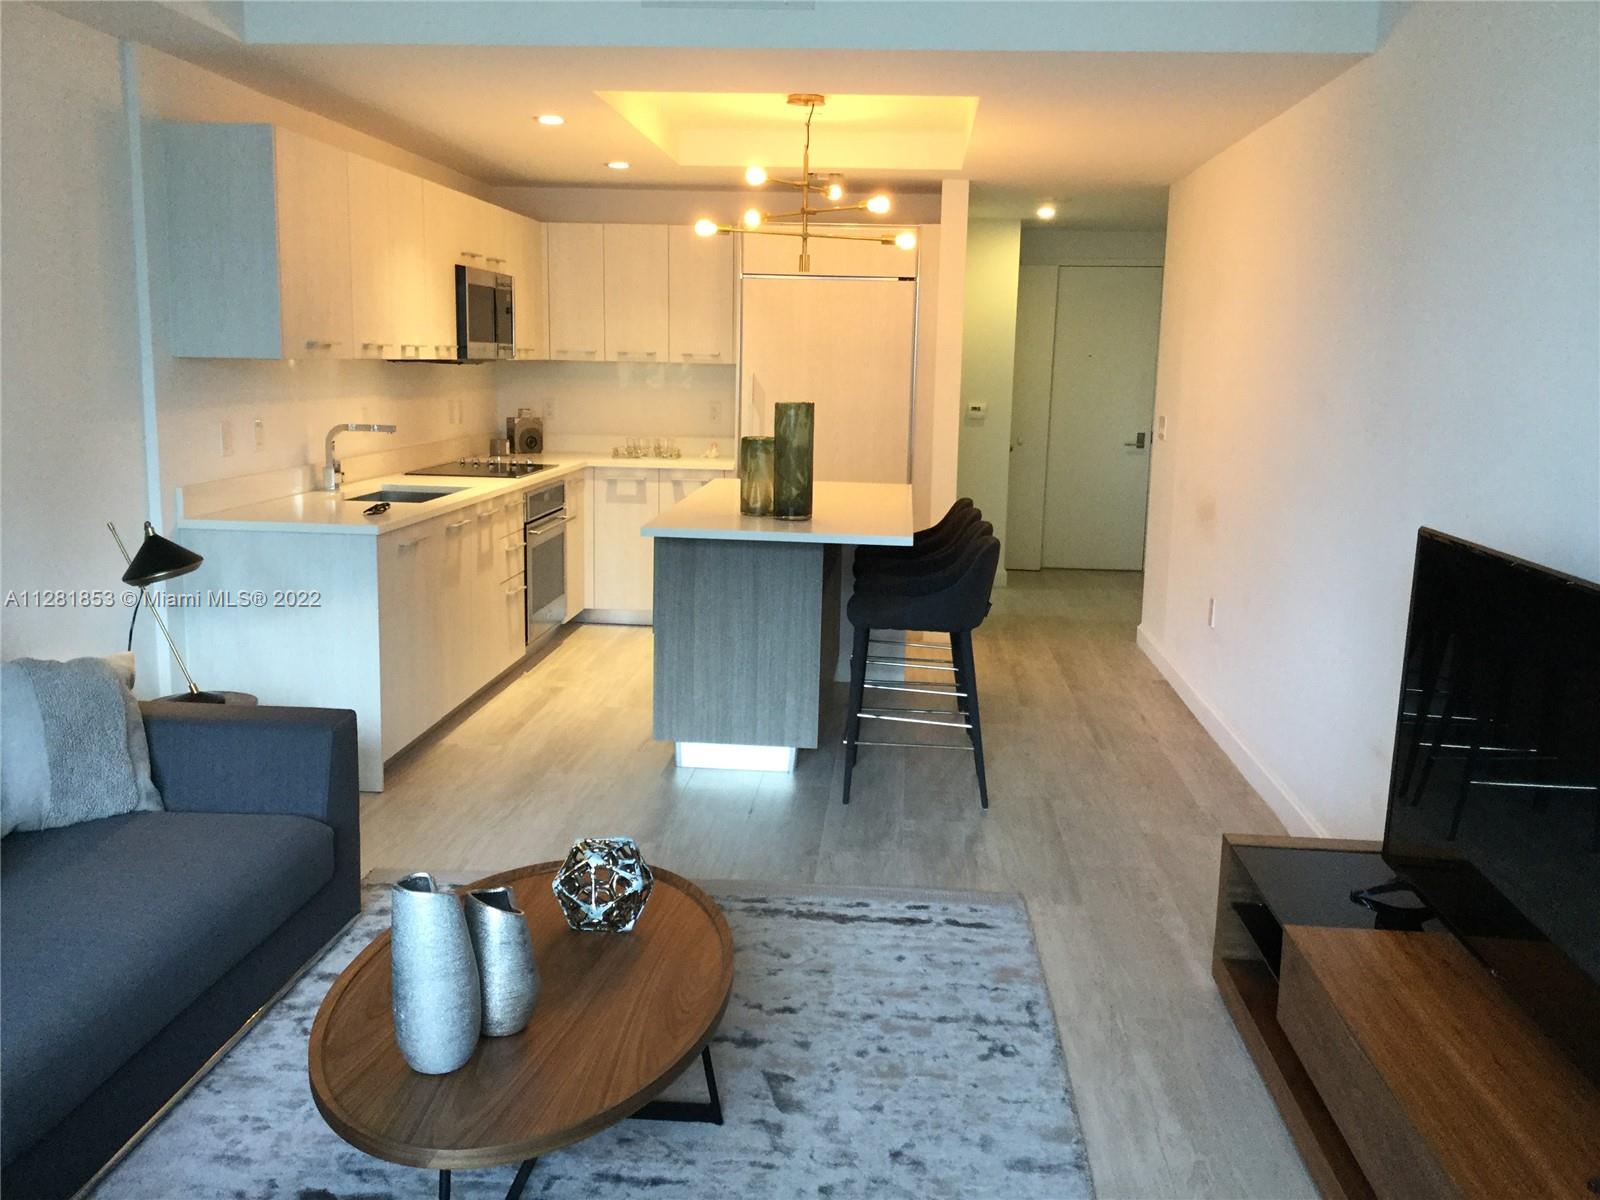 Completely furnished unit at Brickell. Professionally decorated. 1 bedroom / 2 full bathrooms / den converted into second bedroom with sofa bed. Wood like porcelain flooring. Large terrace with great views from Brickell skyline. Washer and dryer. Amenities included 9th floor pool, 2 party rooms, kids room, theater, full gym, & spa, 24hr security & rooftop pool.